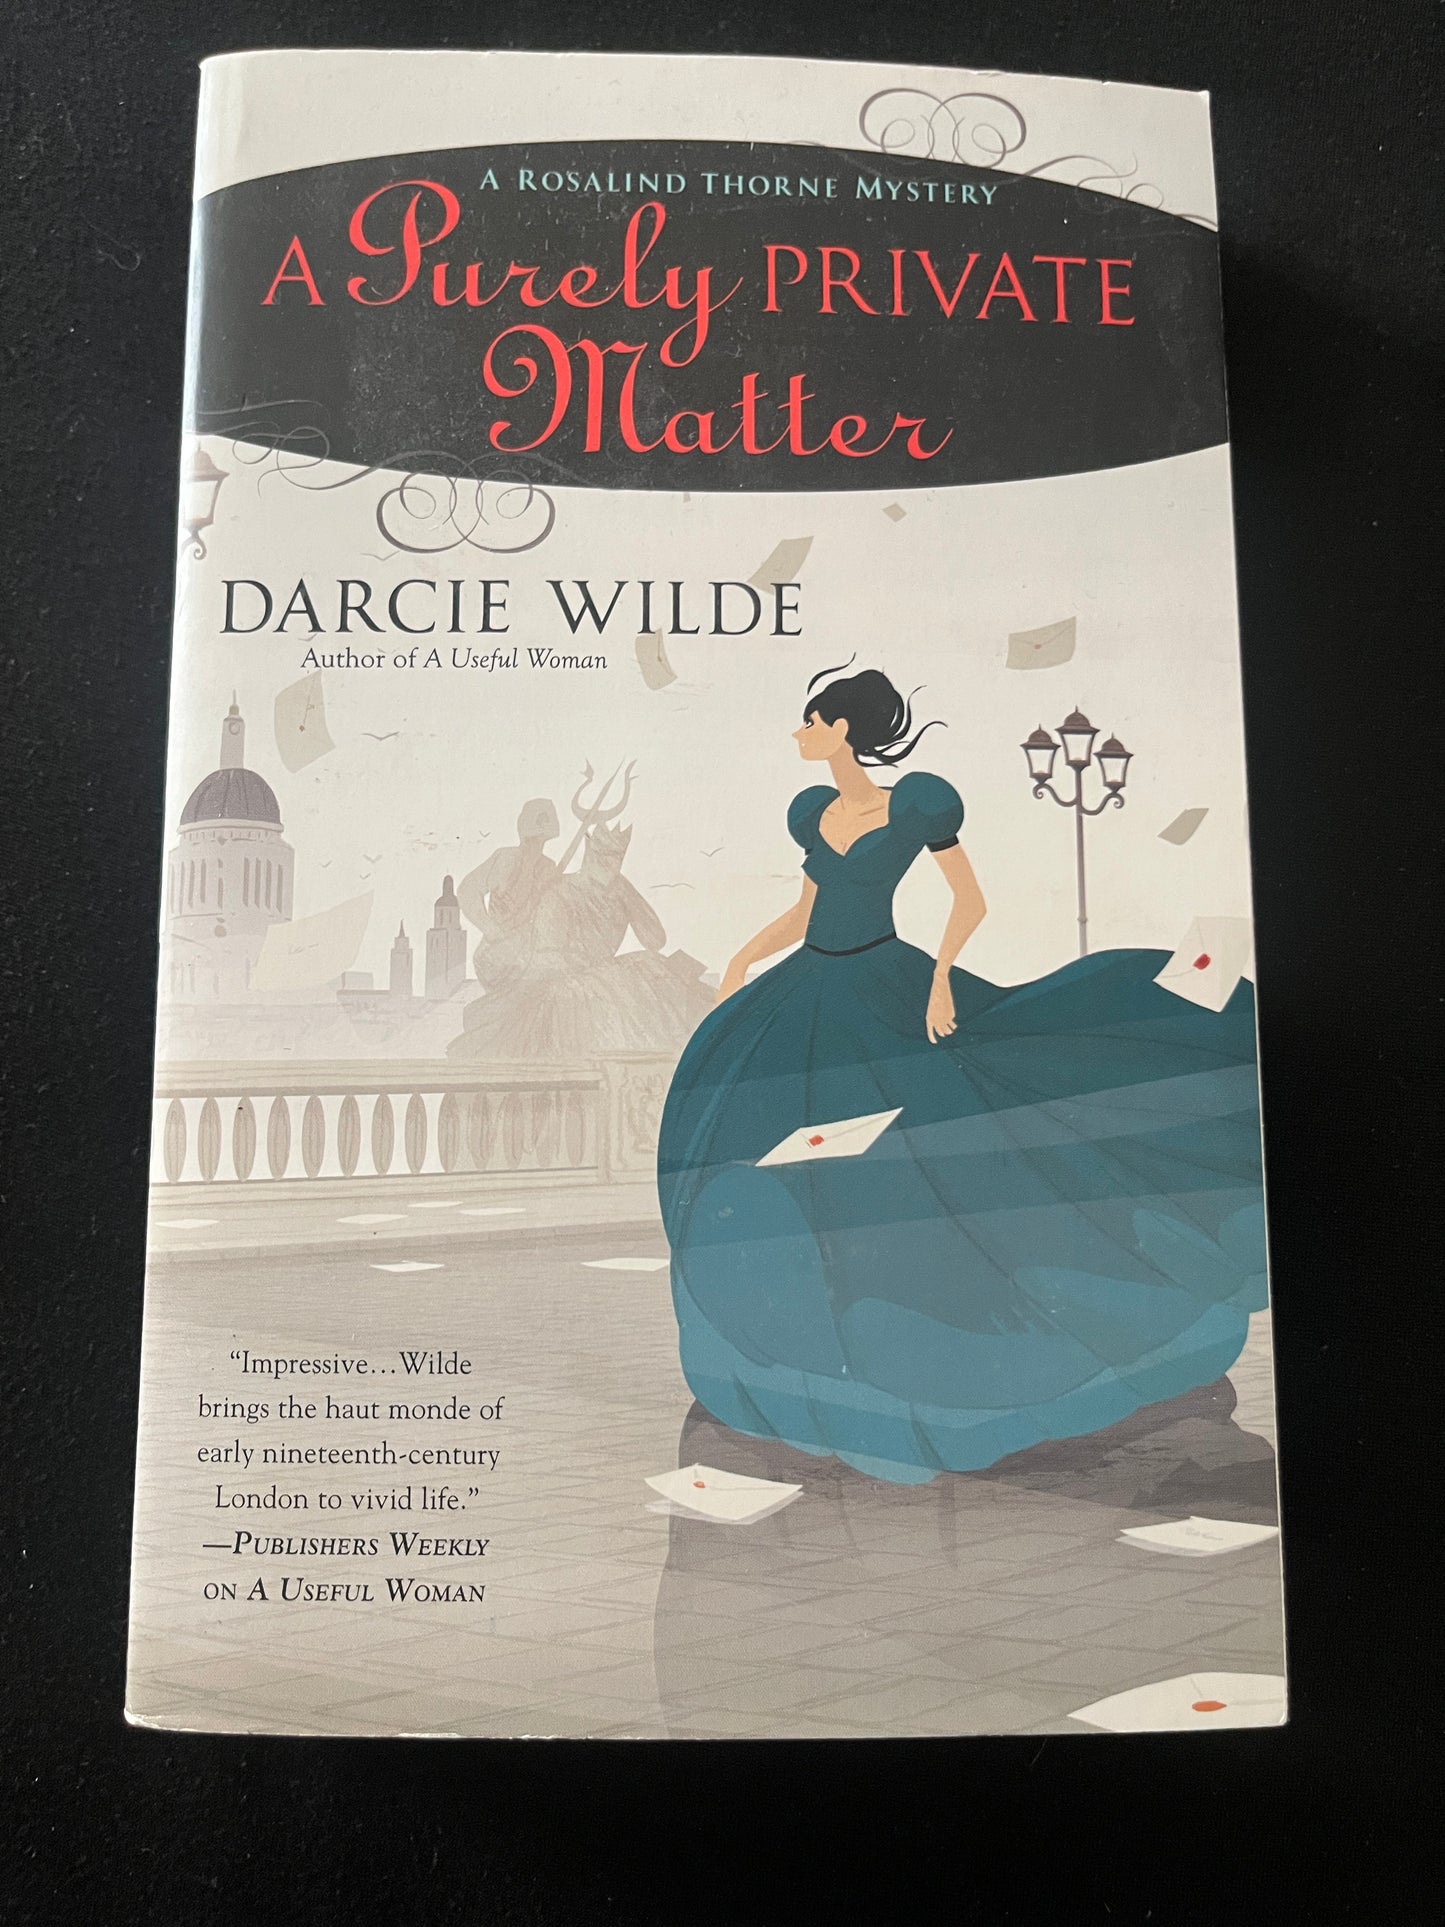 A PURELY PRIVATE MATTER by Darcie Wilde